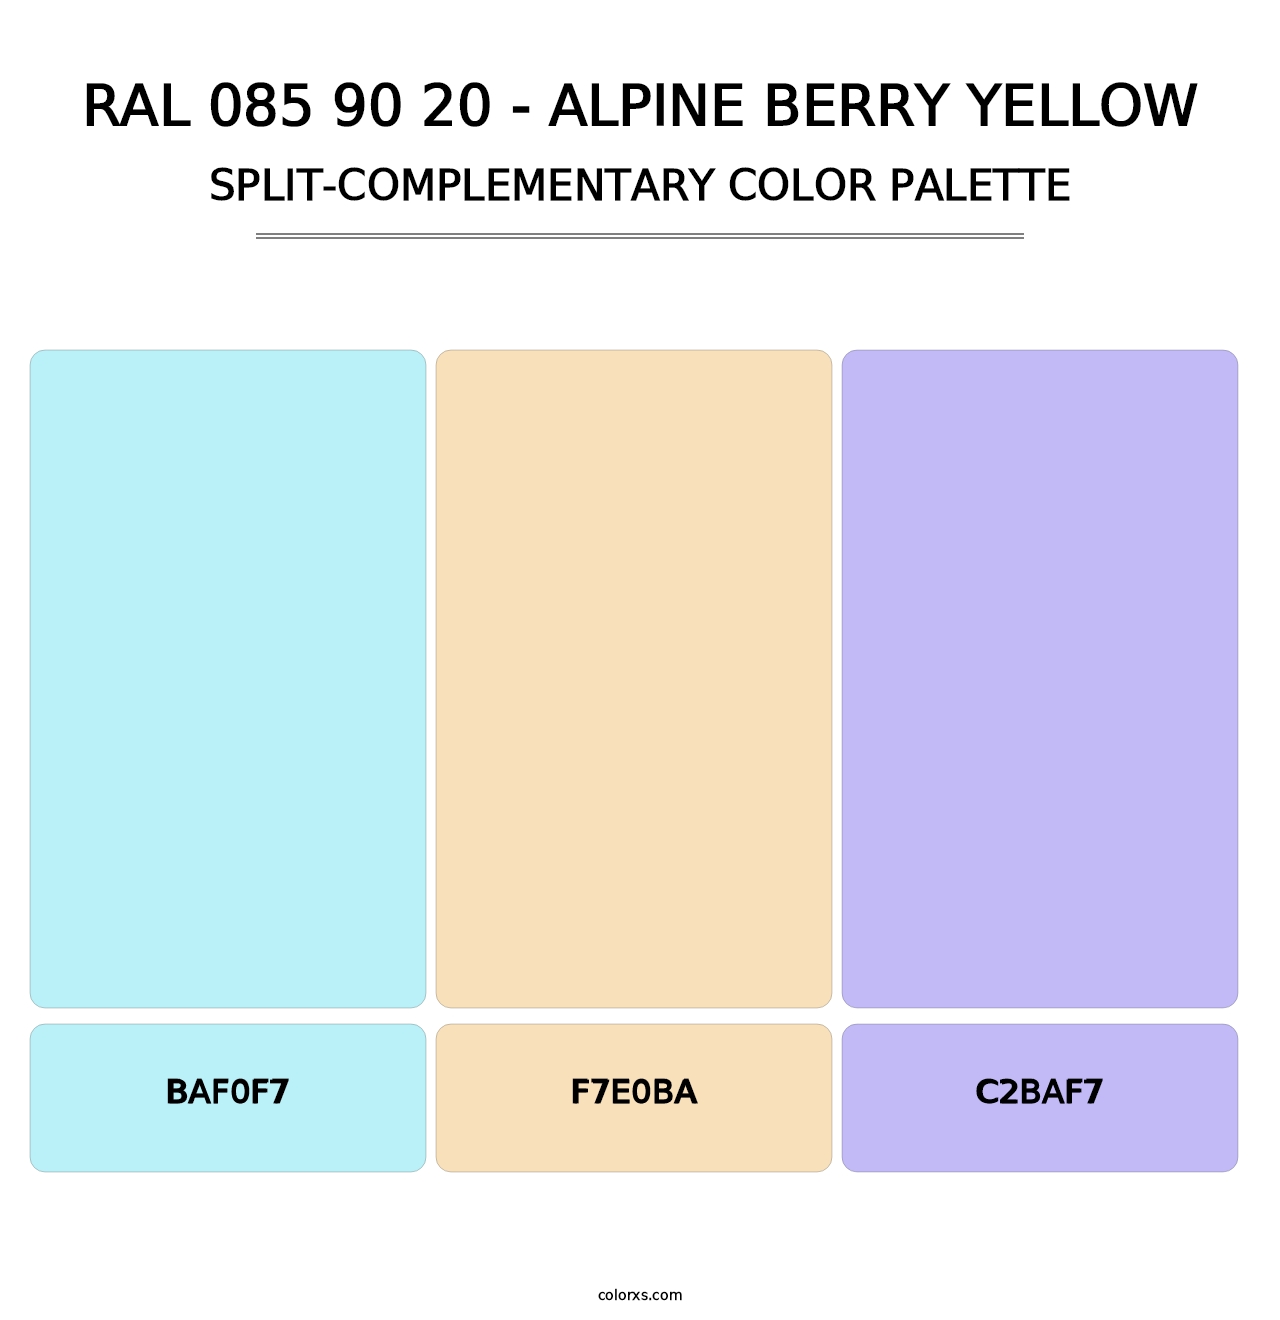 RAL 085 90 20 - Alpine Berry Yellow - Split-Complementary Color Palette